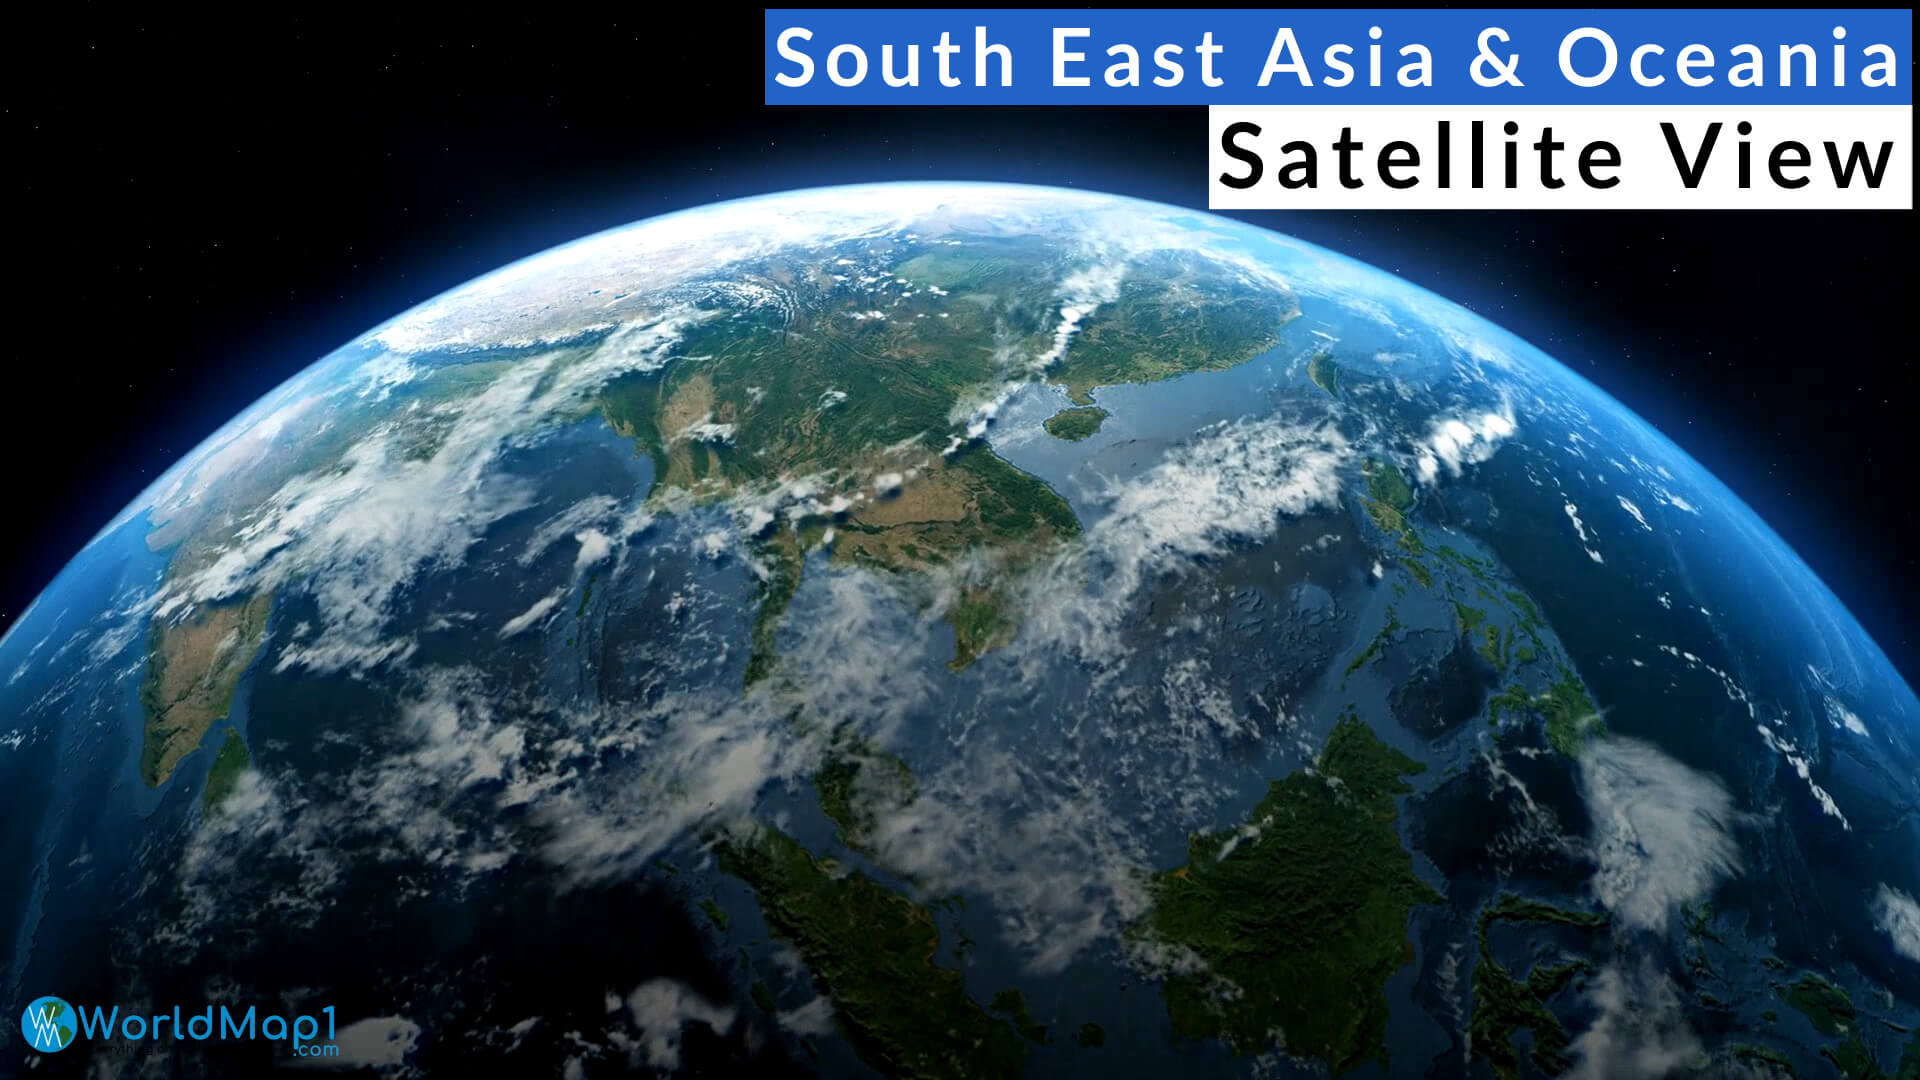 South East Asia and Oceania Satellite View